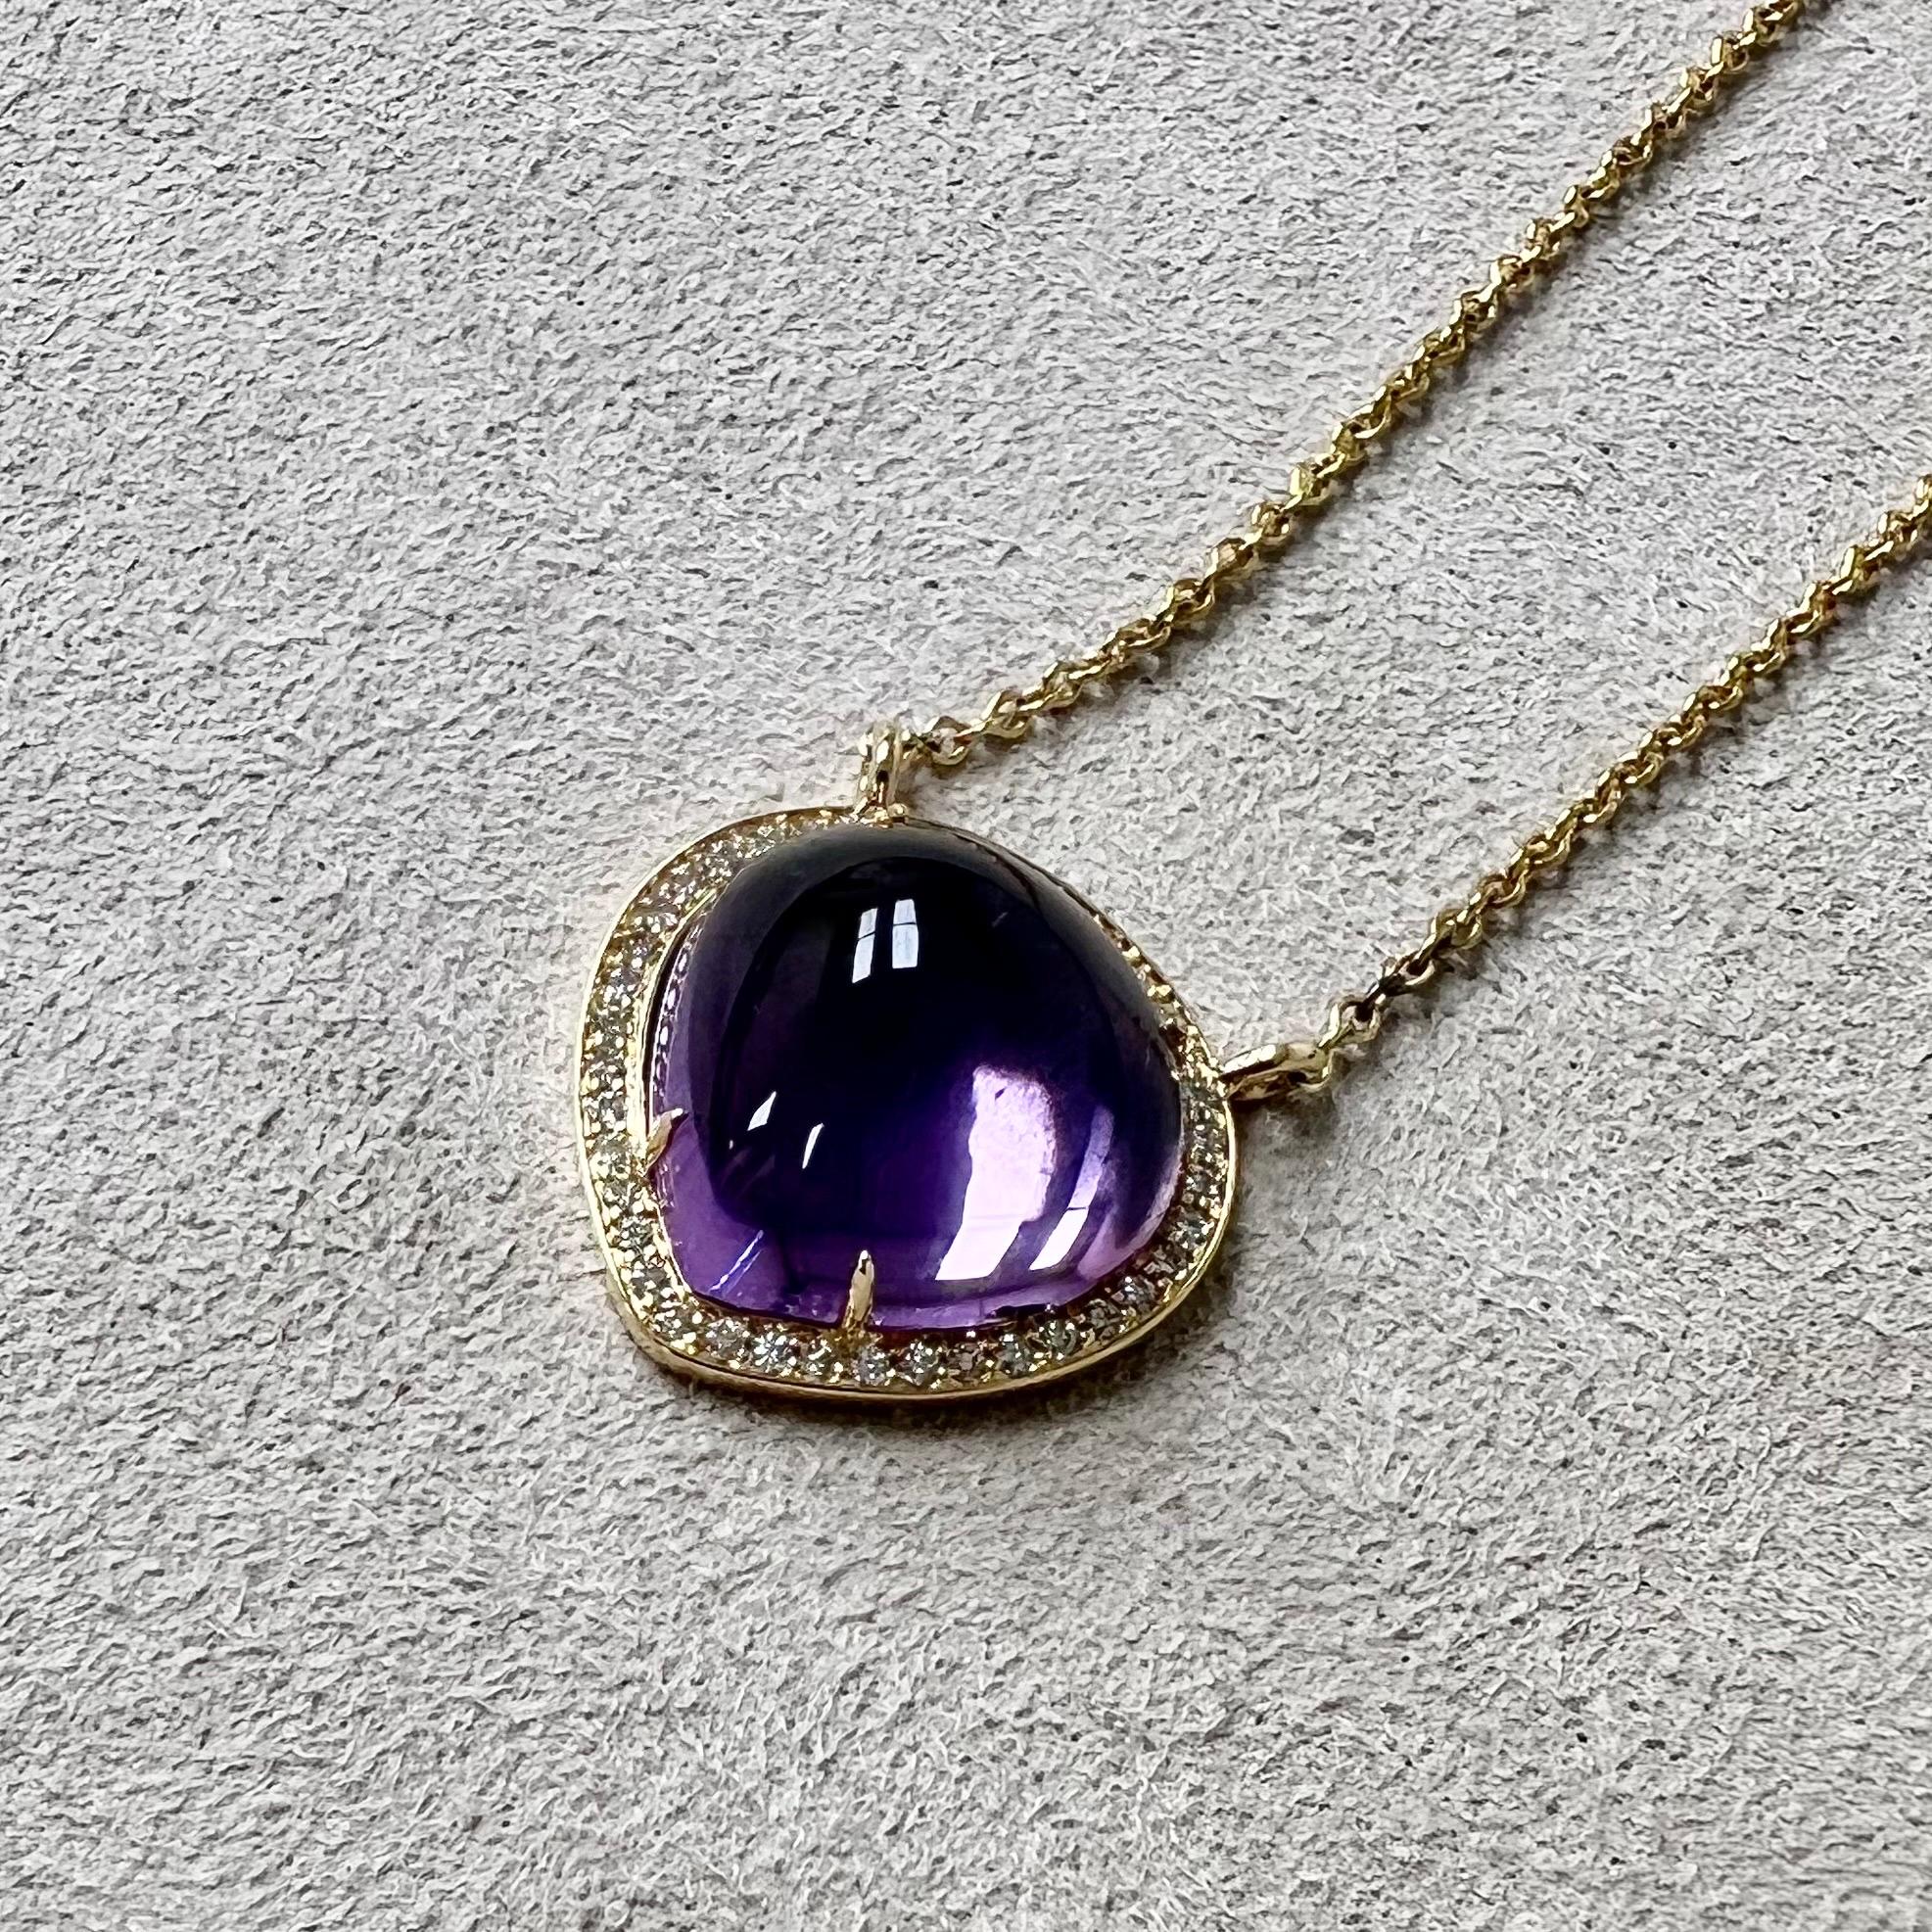 Created in 18 karat yellow gold
Amethyst 12 carats approx.
Diamonds 0.20 carat approx.
18 inch necklace with loops at 16th and 17th inch
Lobster clasp

Constructed in opulent 18 karat yellow gold, this striking limited edition necklace features a